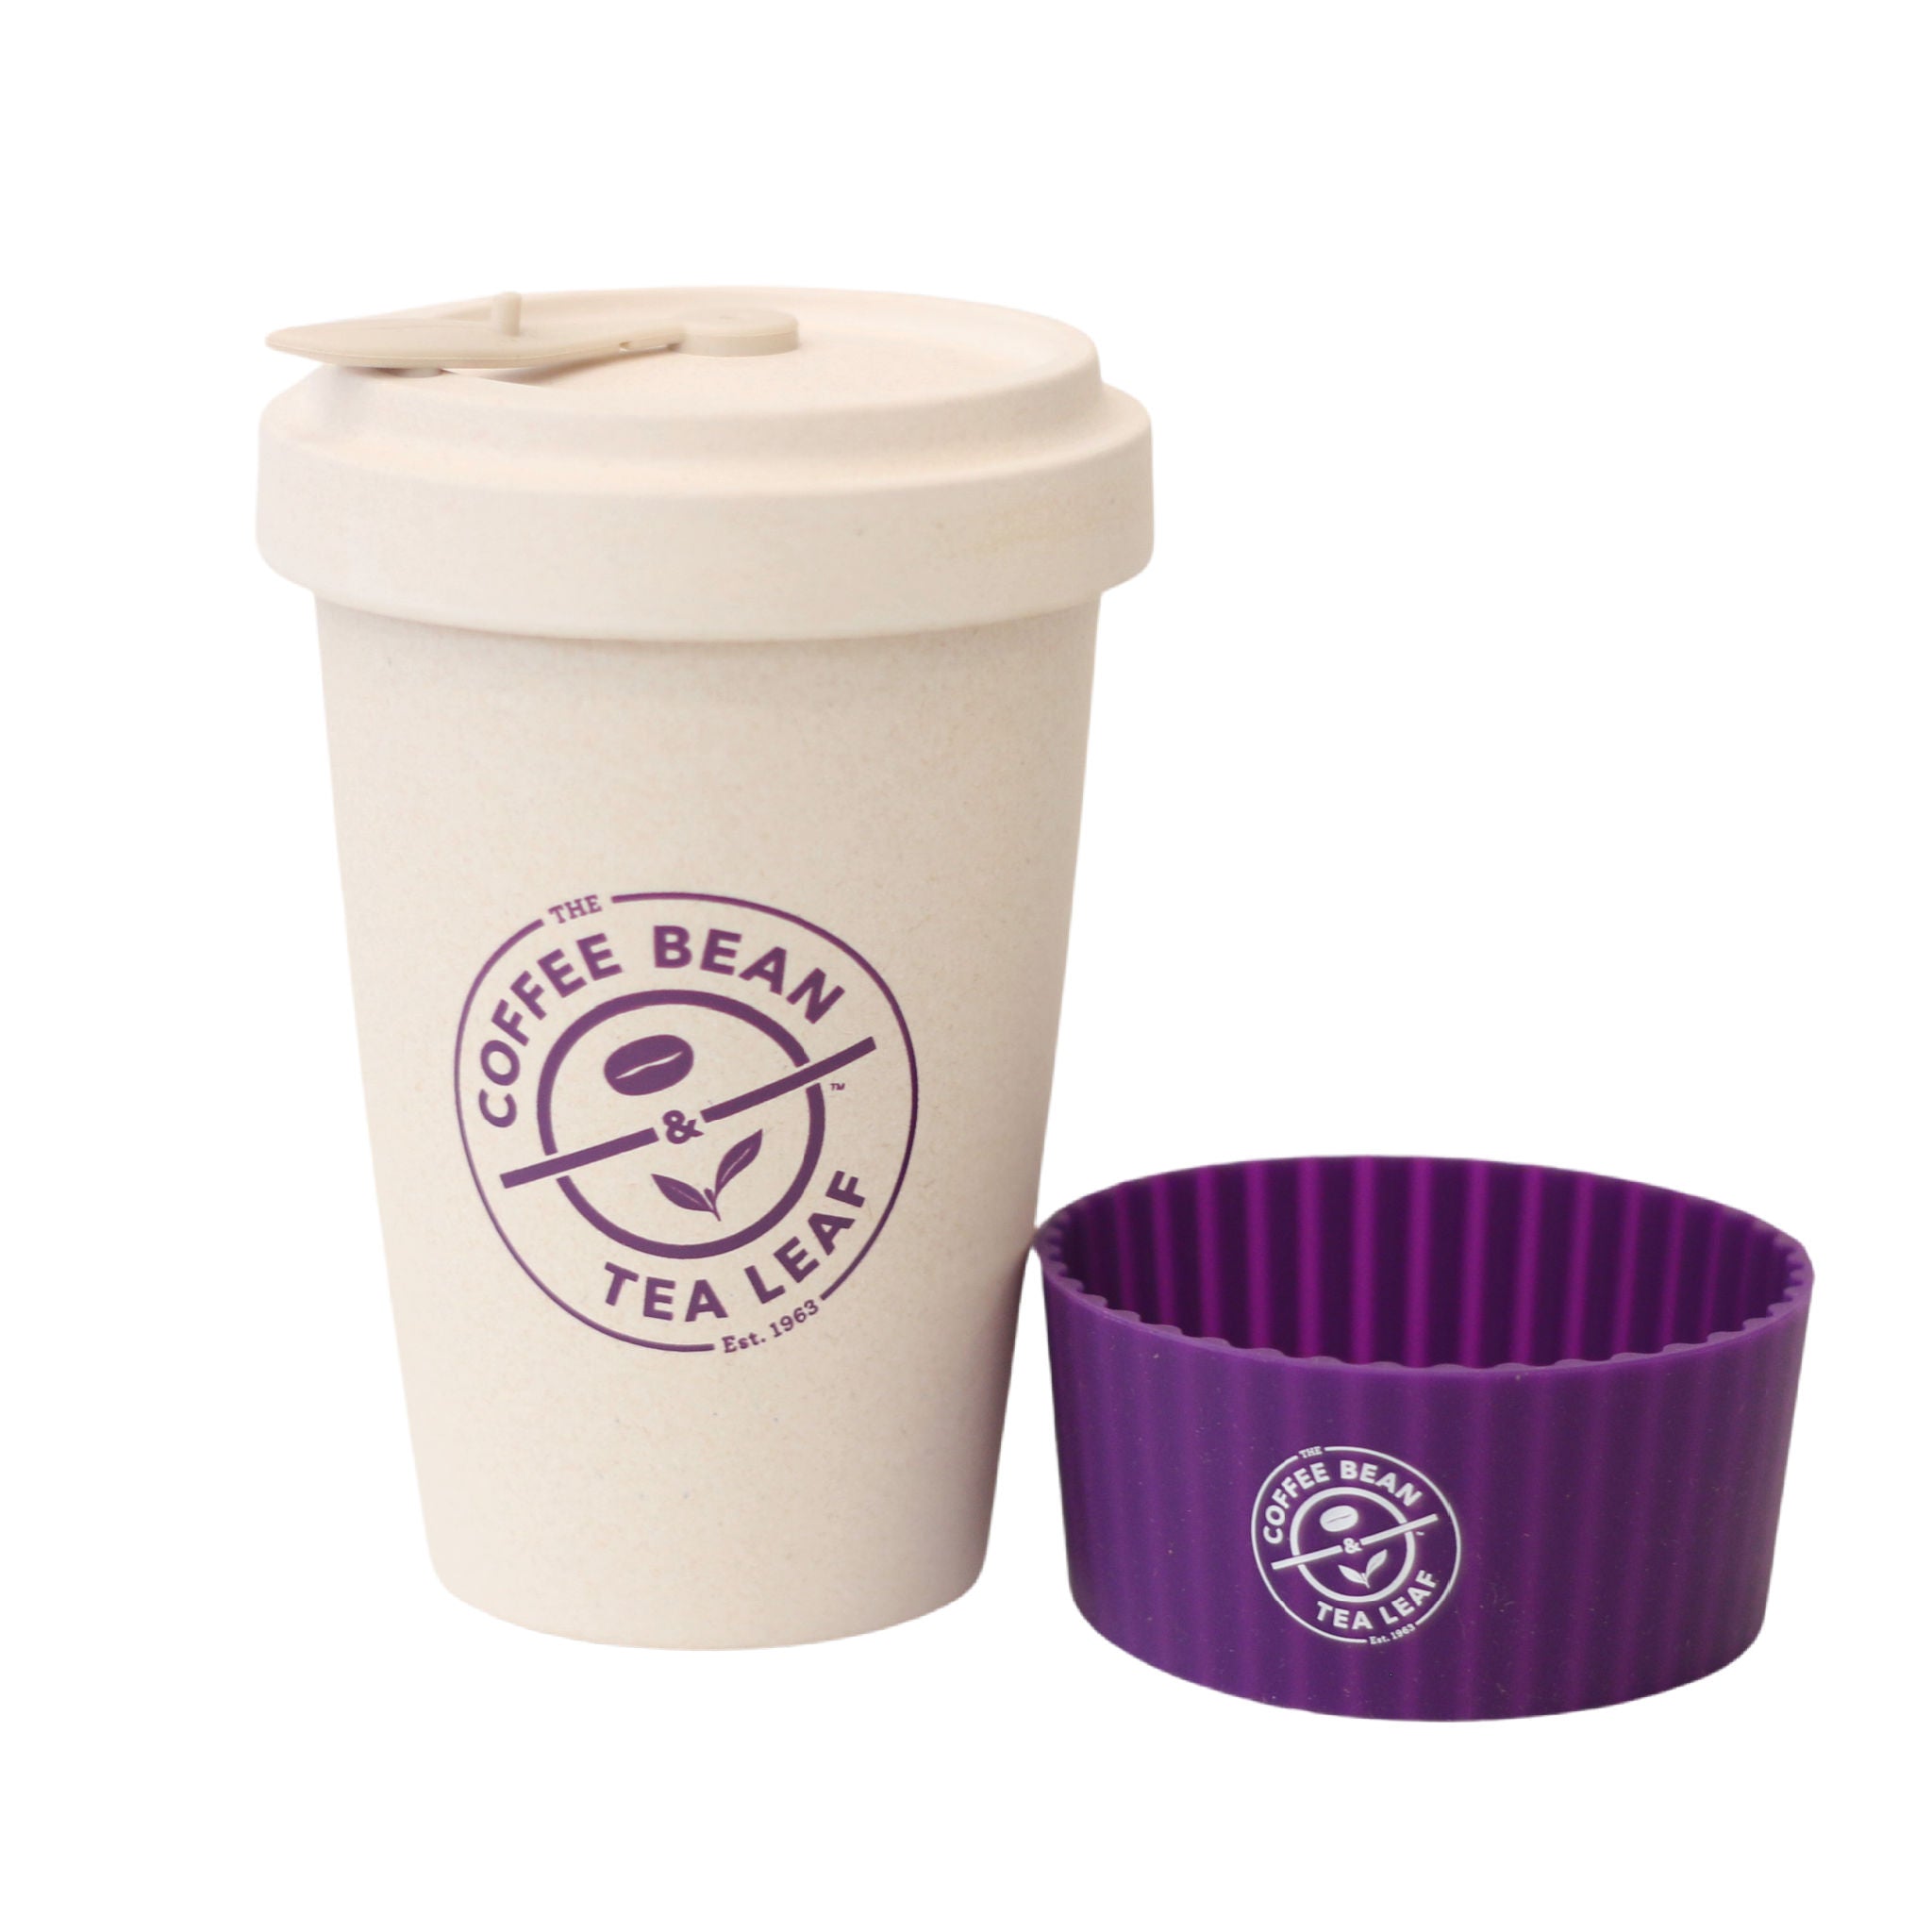 Reusable Coffee To Go Cup, 16oz Travel Cup, Made in USA, BPA-Free